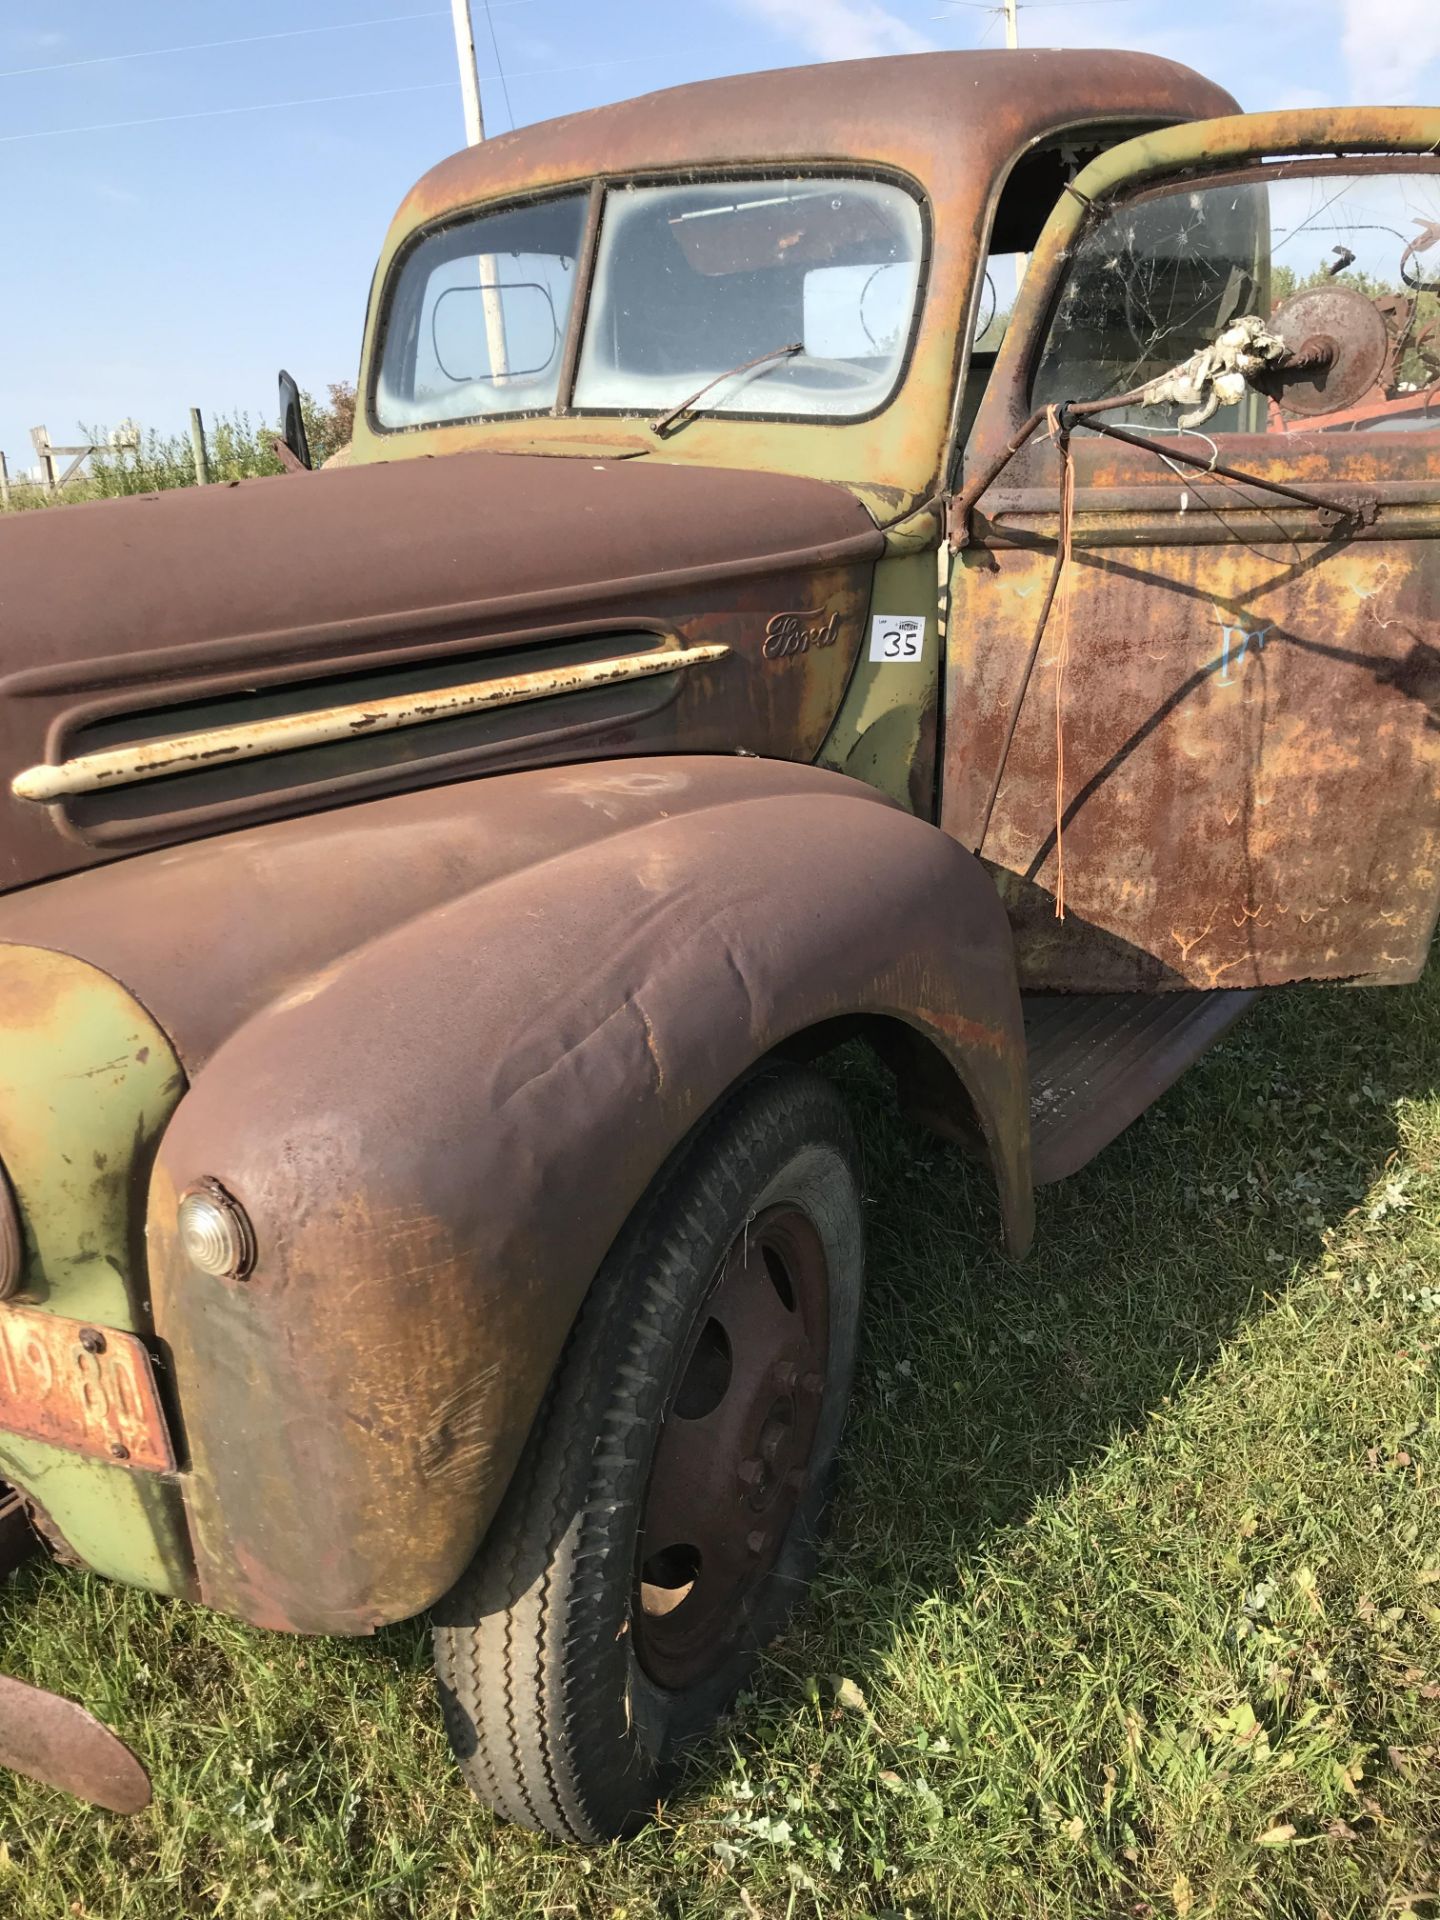 1947 Ford truck 1.5 ton brown, 67162 miles, sn:250??7734